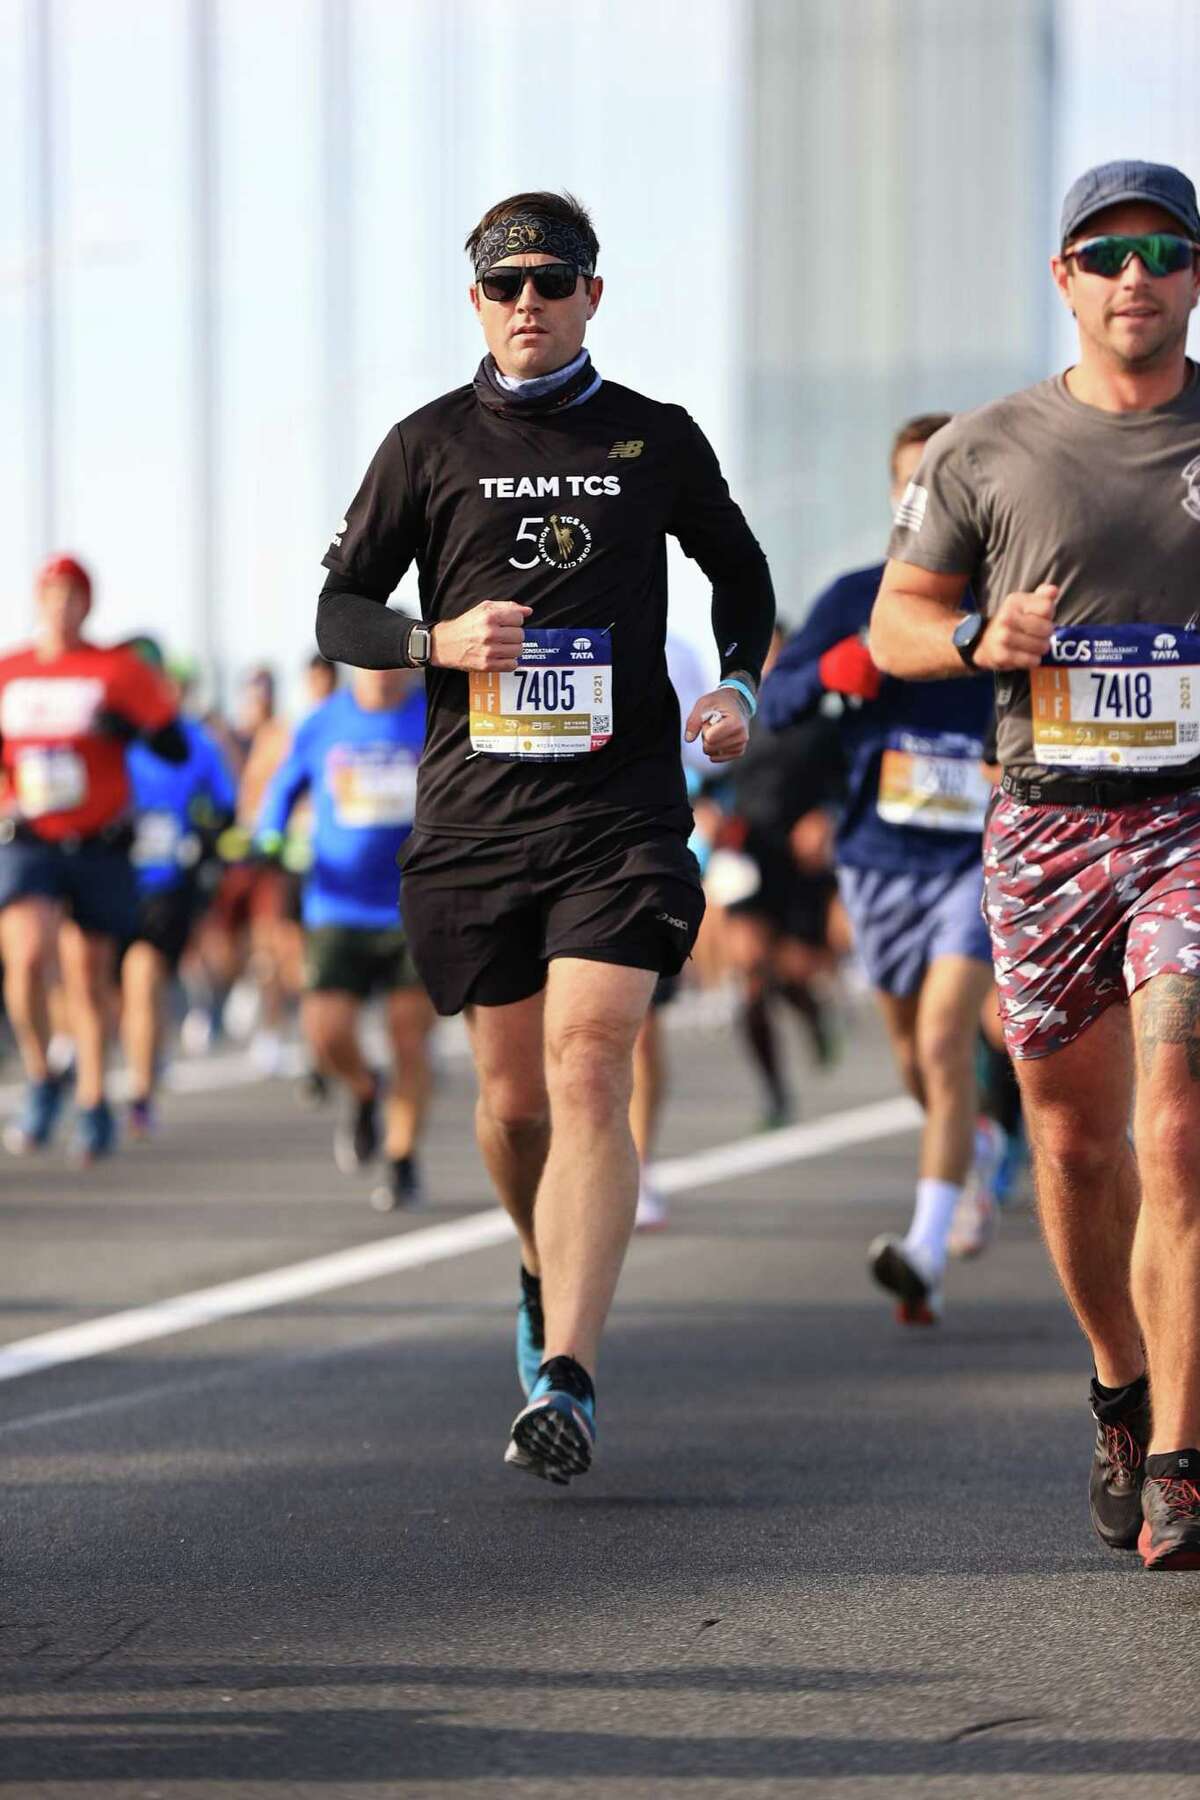 Jim McCaffrey, 41, of Trumbull, ran in the New York City Marathon in 2021. His daughter, Mia died in March 2017 after battling the rare childhood cancer rhabdomyosarcoma. On Jan. 29, 2022, Jim McCaffrey, is participating in the Infinite Love PEDAL-THON 22 to raise more for Infinite Love for Kids Fighting Cancer, a charity that raises money for research into pediatric cancers.